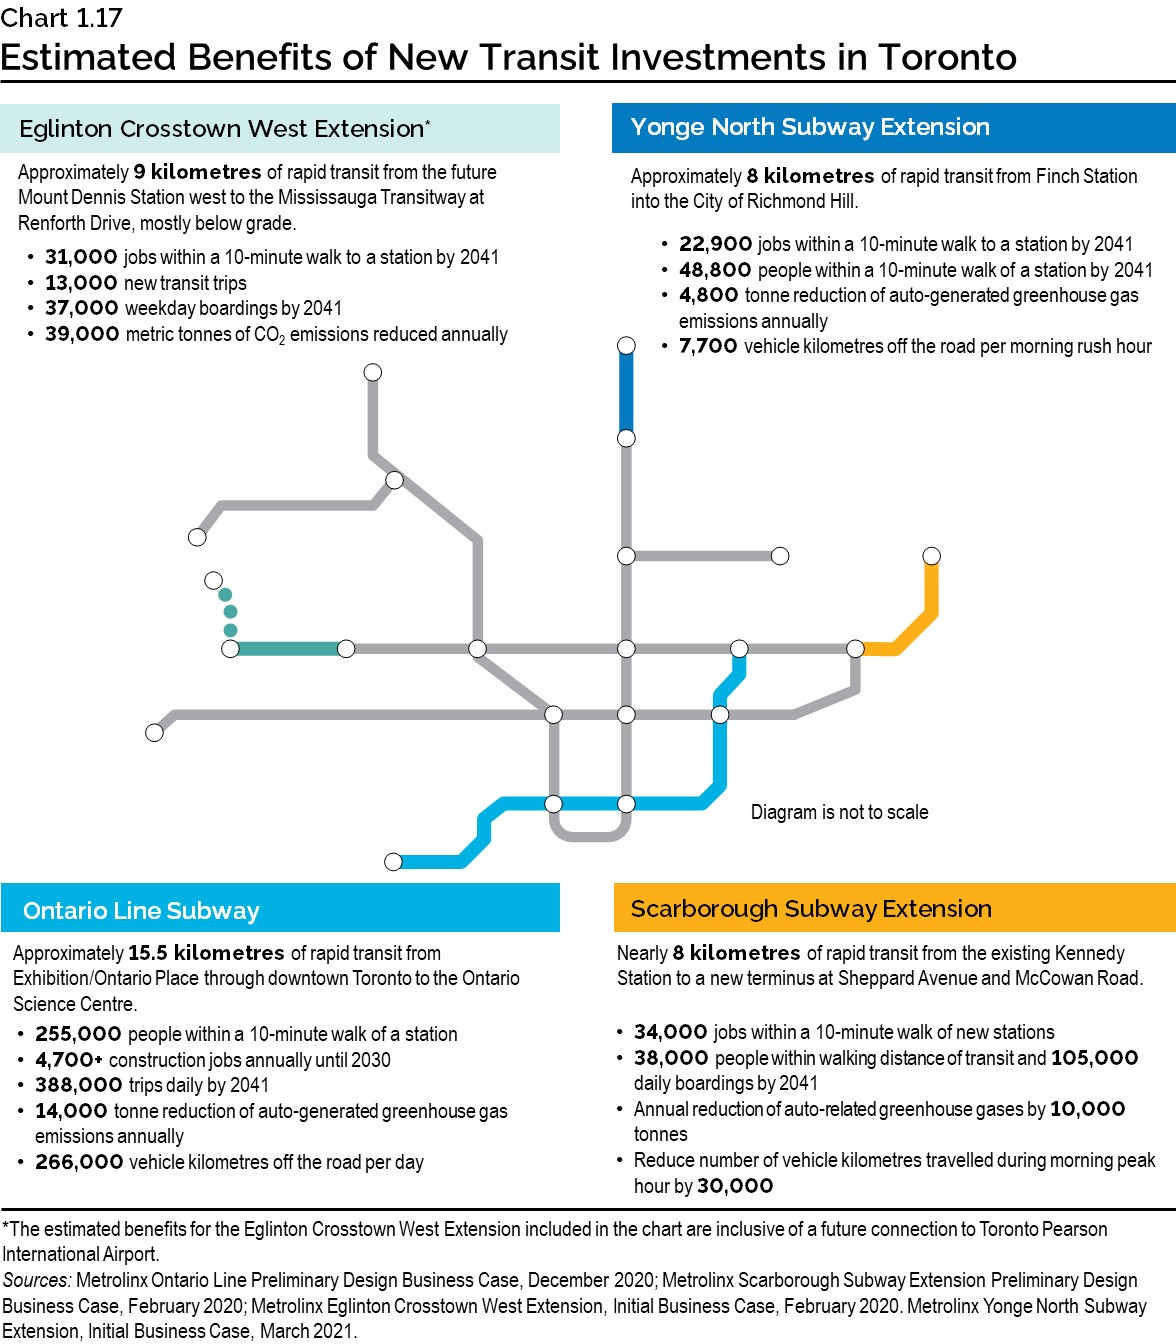 Chart 1.17: Estimated Benefits of New Transit Investments in Toronto